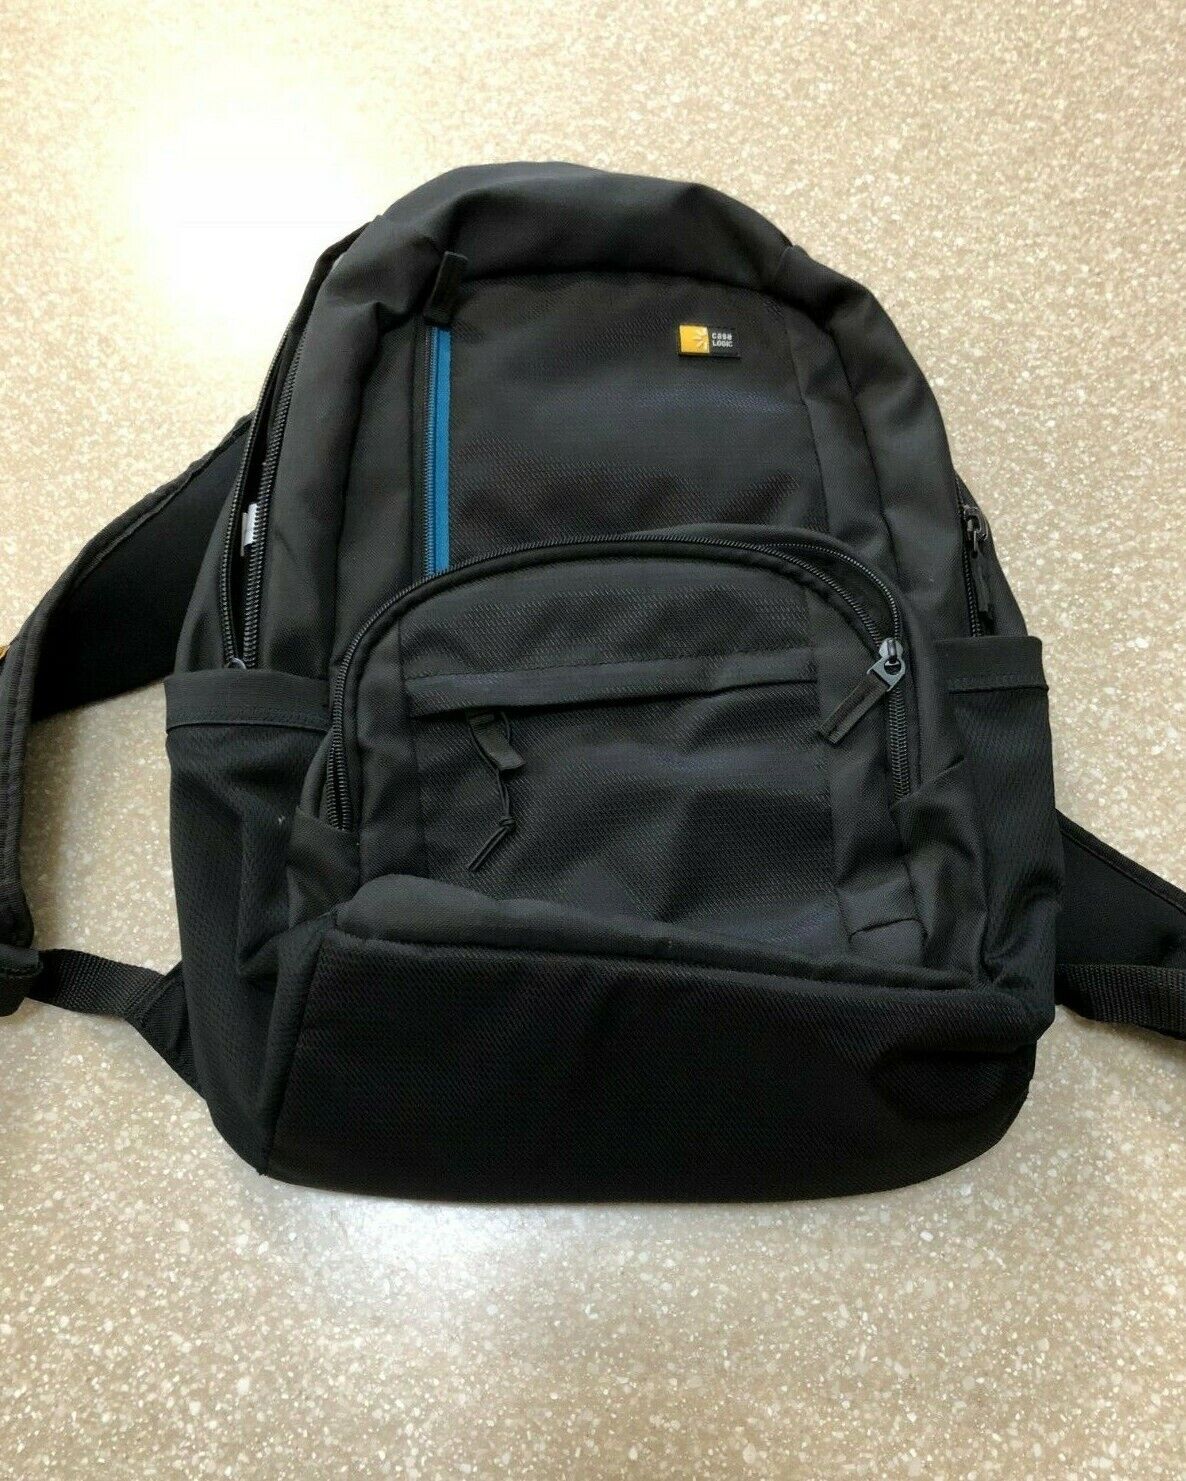 Logic Gbp 116 16 Inch Laptop Backpack Used